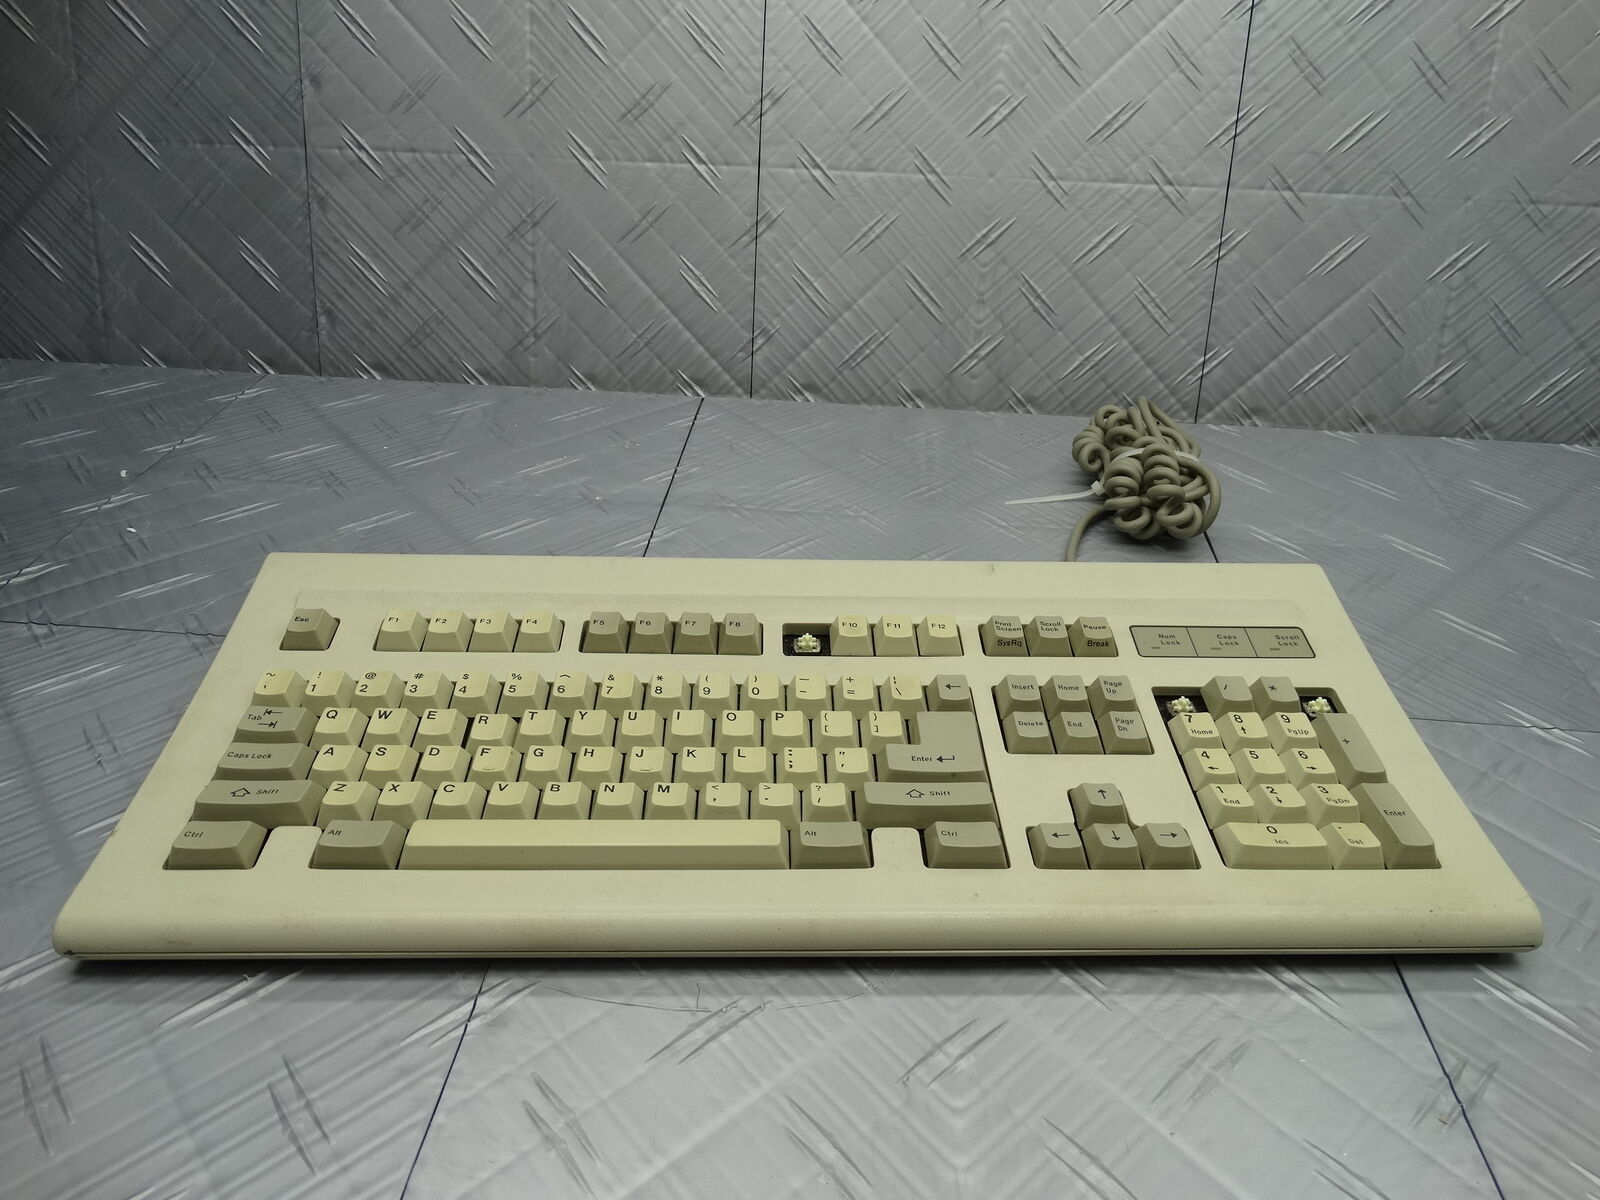 Chicony Mechanical AT/XT Keyboard KB-5181 E8H5IKKB-5161 Mainframe Collection